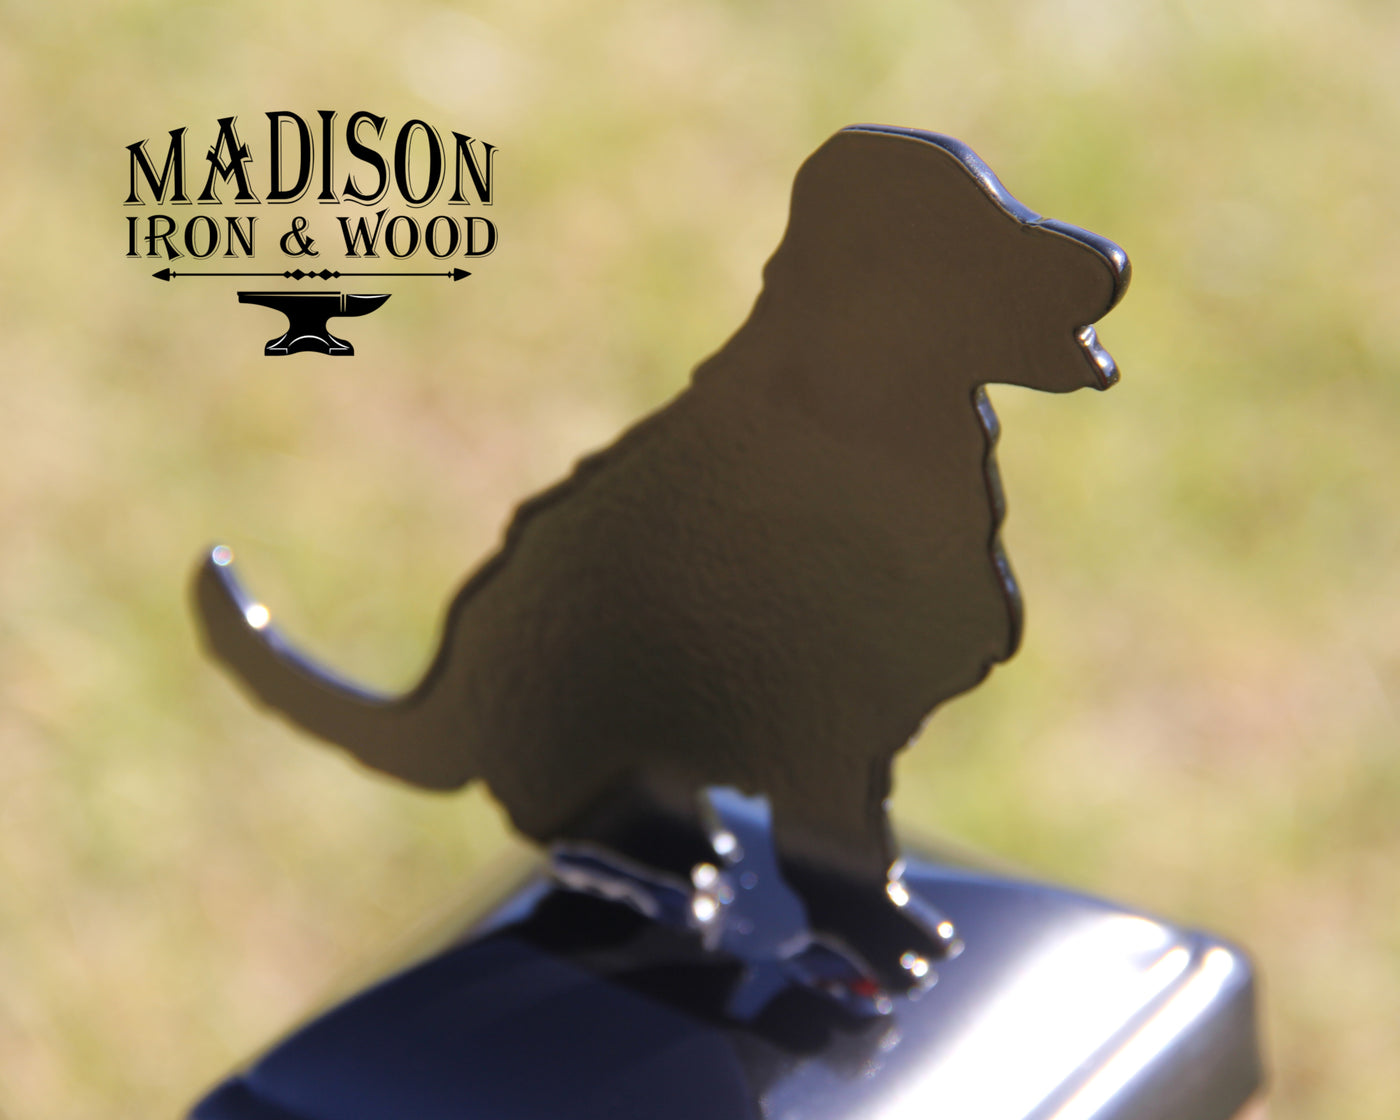 4x4 Golden Retriever Post Cap - Madison Iron and Wood - Post Cap - metal outdoor decor - Steel deocrations - american made products - veteran owned business products - fencing decorations - fencing supplies - custom wall decorations - personalized wall signs - steel - decorative post caps - steel post caps - metal post caps - brackets - structural brackets - home improvement - easter - easter decorations - easter gift - easter yard decor